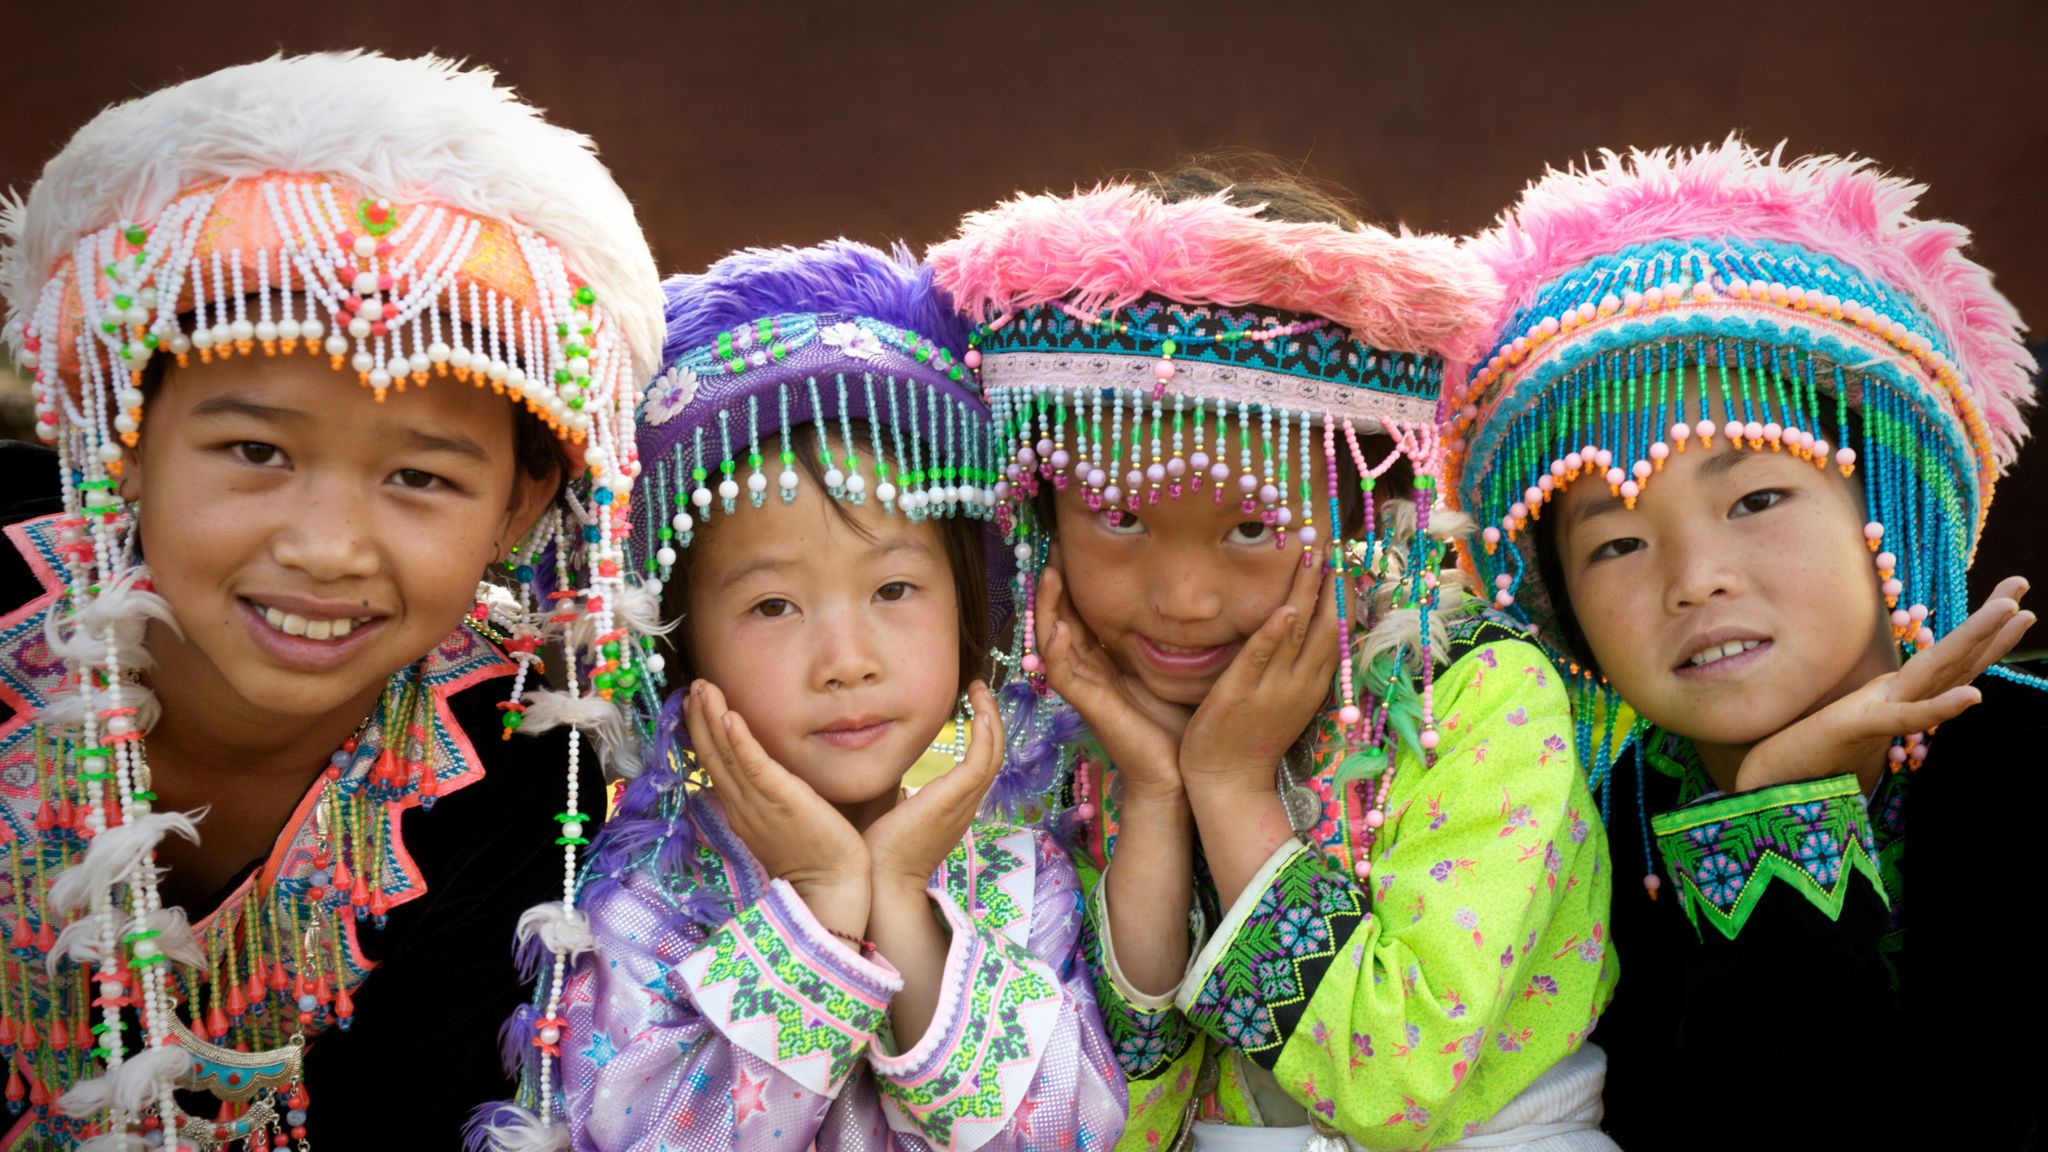 Day 10 Learn About The Diverse Culture In Hill Tribe Villages